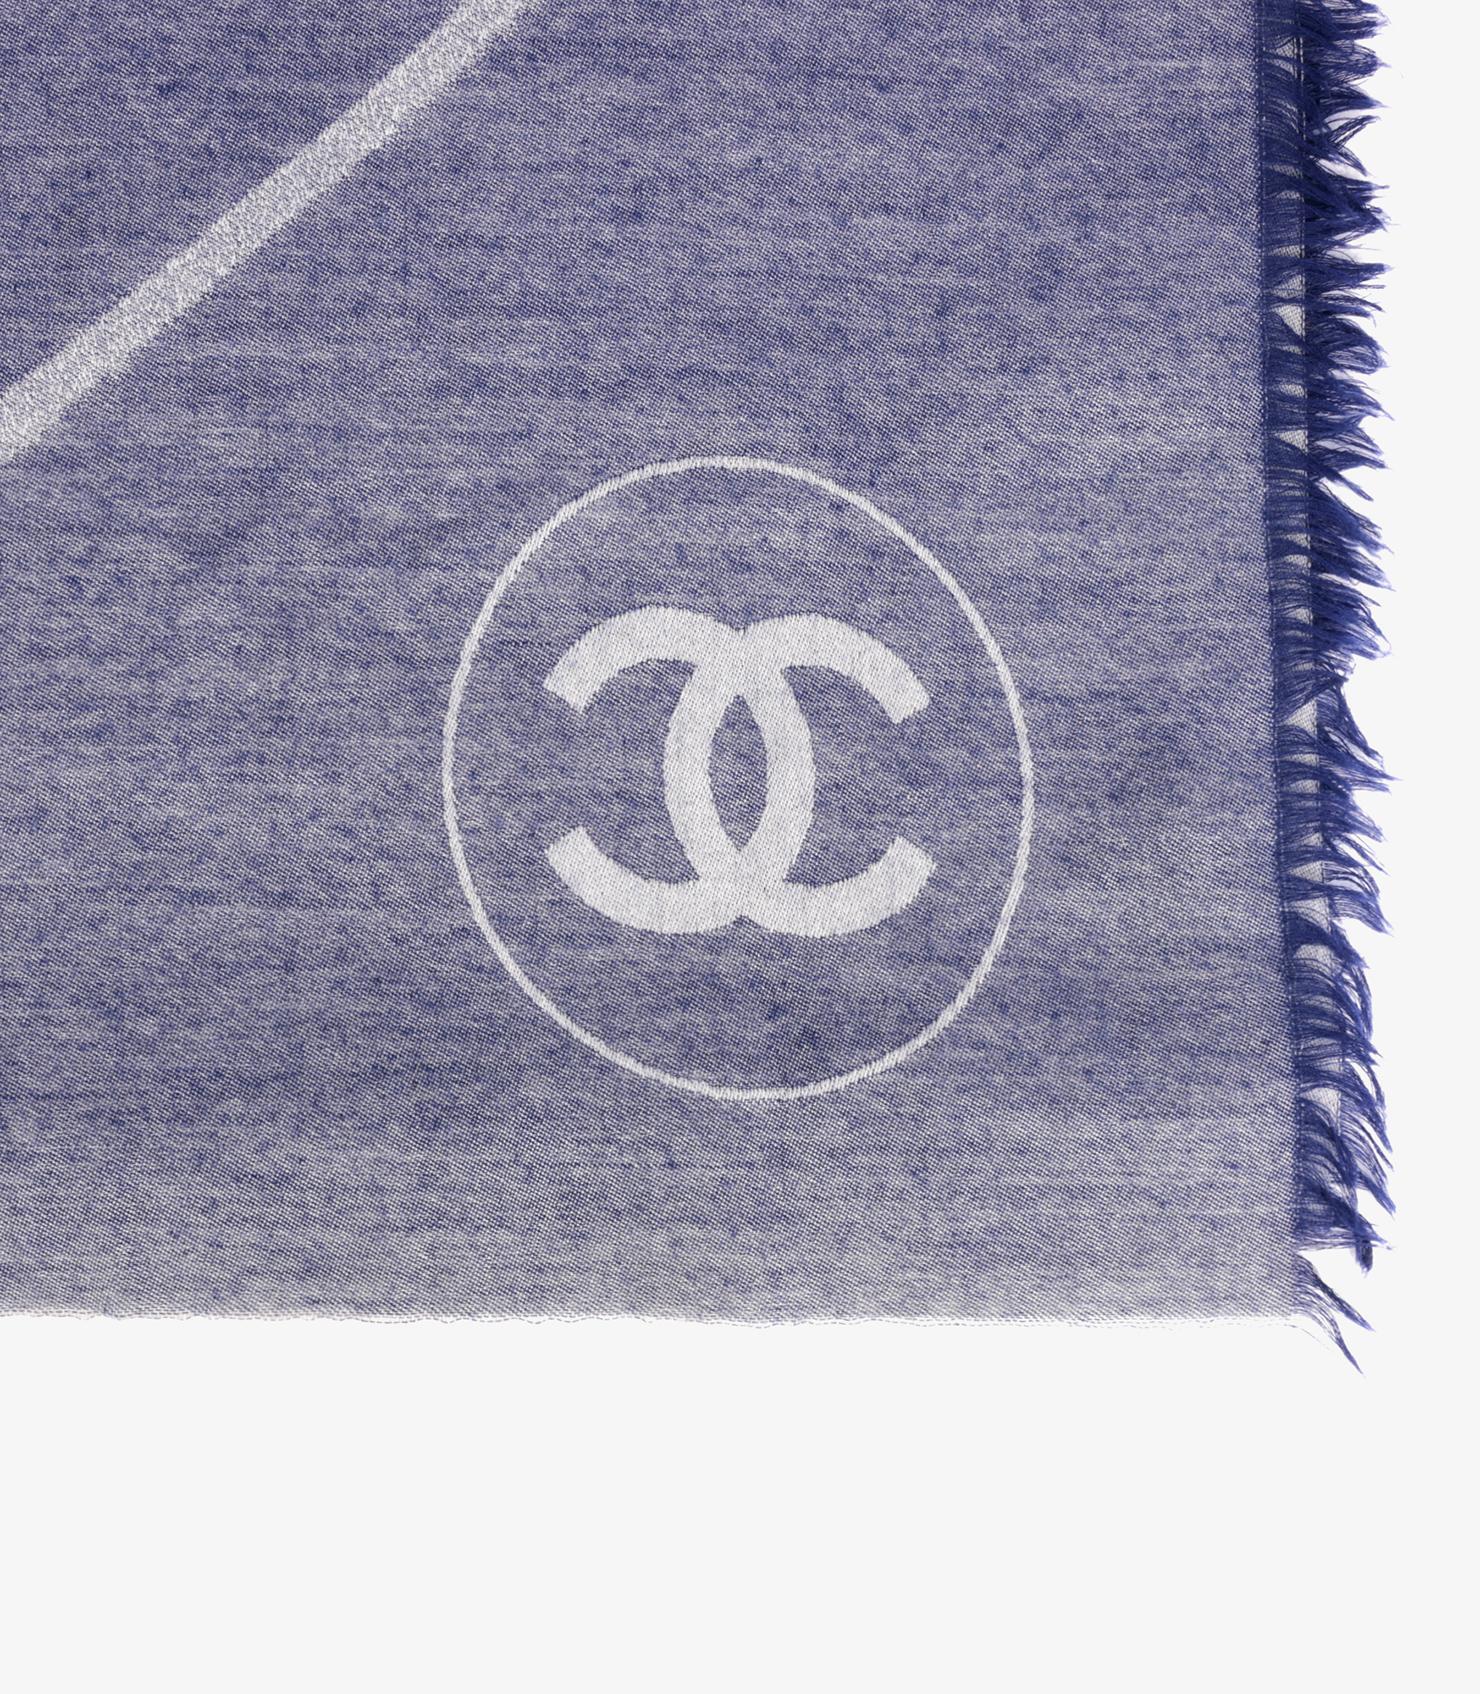 Chanel Blue Cashmere Airline Shawl

Brand- Chanel
Model- Shawl
Product Type- Scarf
Age- Circa 2010
Colour- Blue
Material(s)- Cashmere

Height- 160cm
Width- 200cm
Country of Origin- Italy

Condition Rating- Excellent
Exterior Condition- The exterior